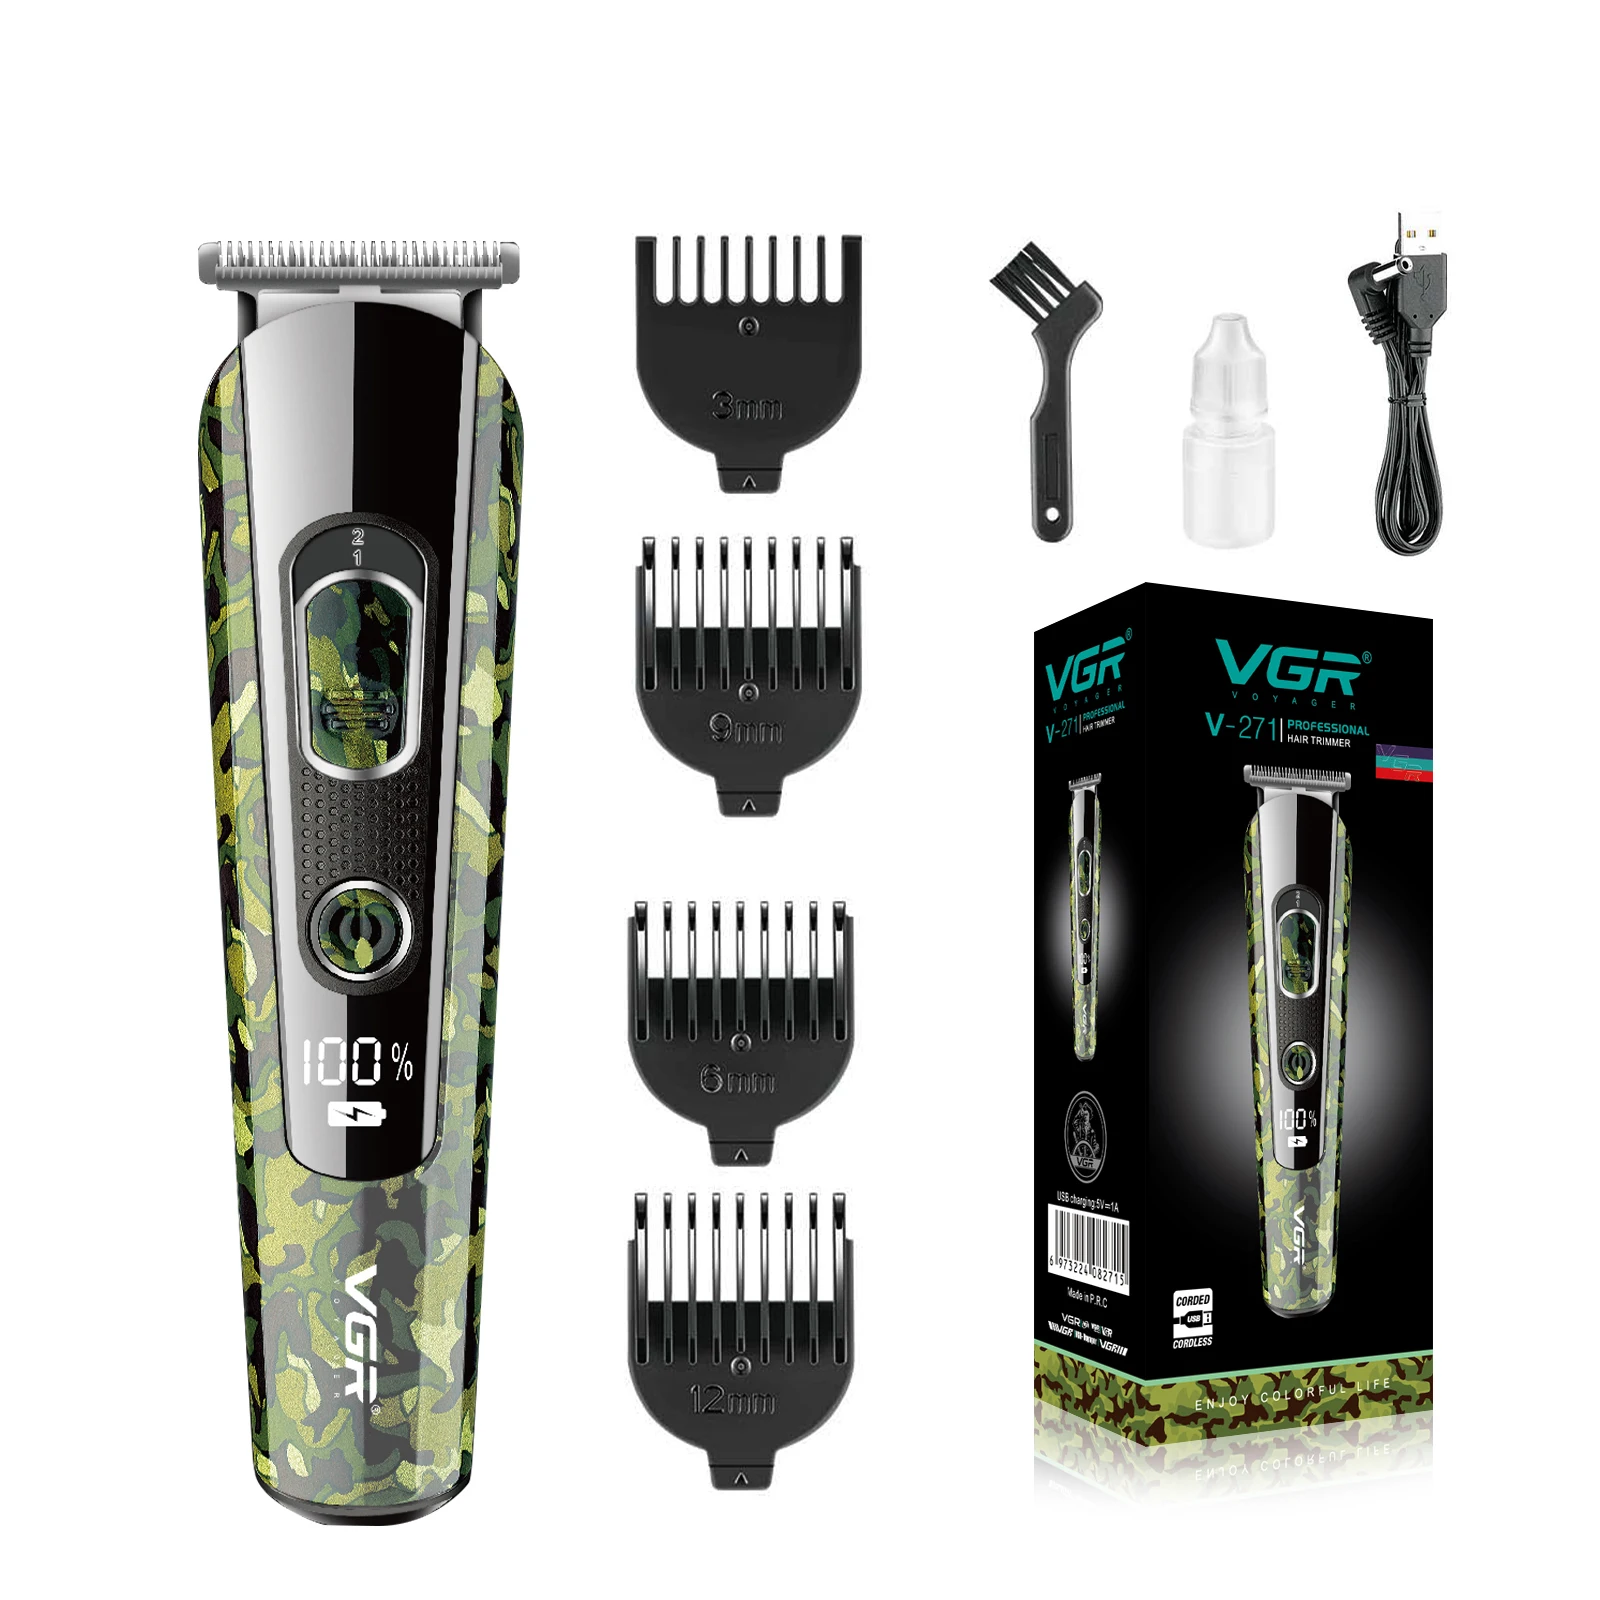 1 Piece Male Pure Power Pubic Indian Price Hair Removal Trimmer For Men -  Buy Vgr 2021 V-661 Adjust Knob Electric Professional Barber Hair Clipper  Trimmer For Men,Women Resuxi Shinon Hair Trimmer,Trimmer